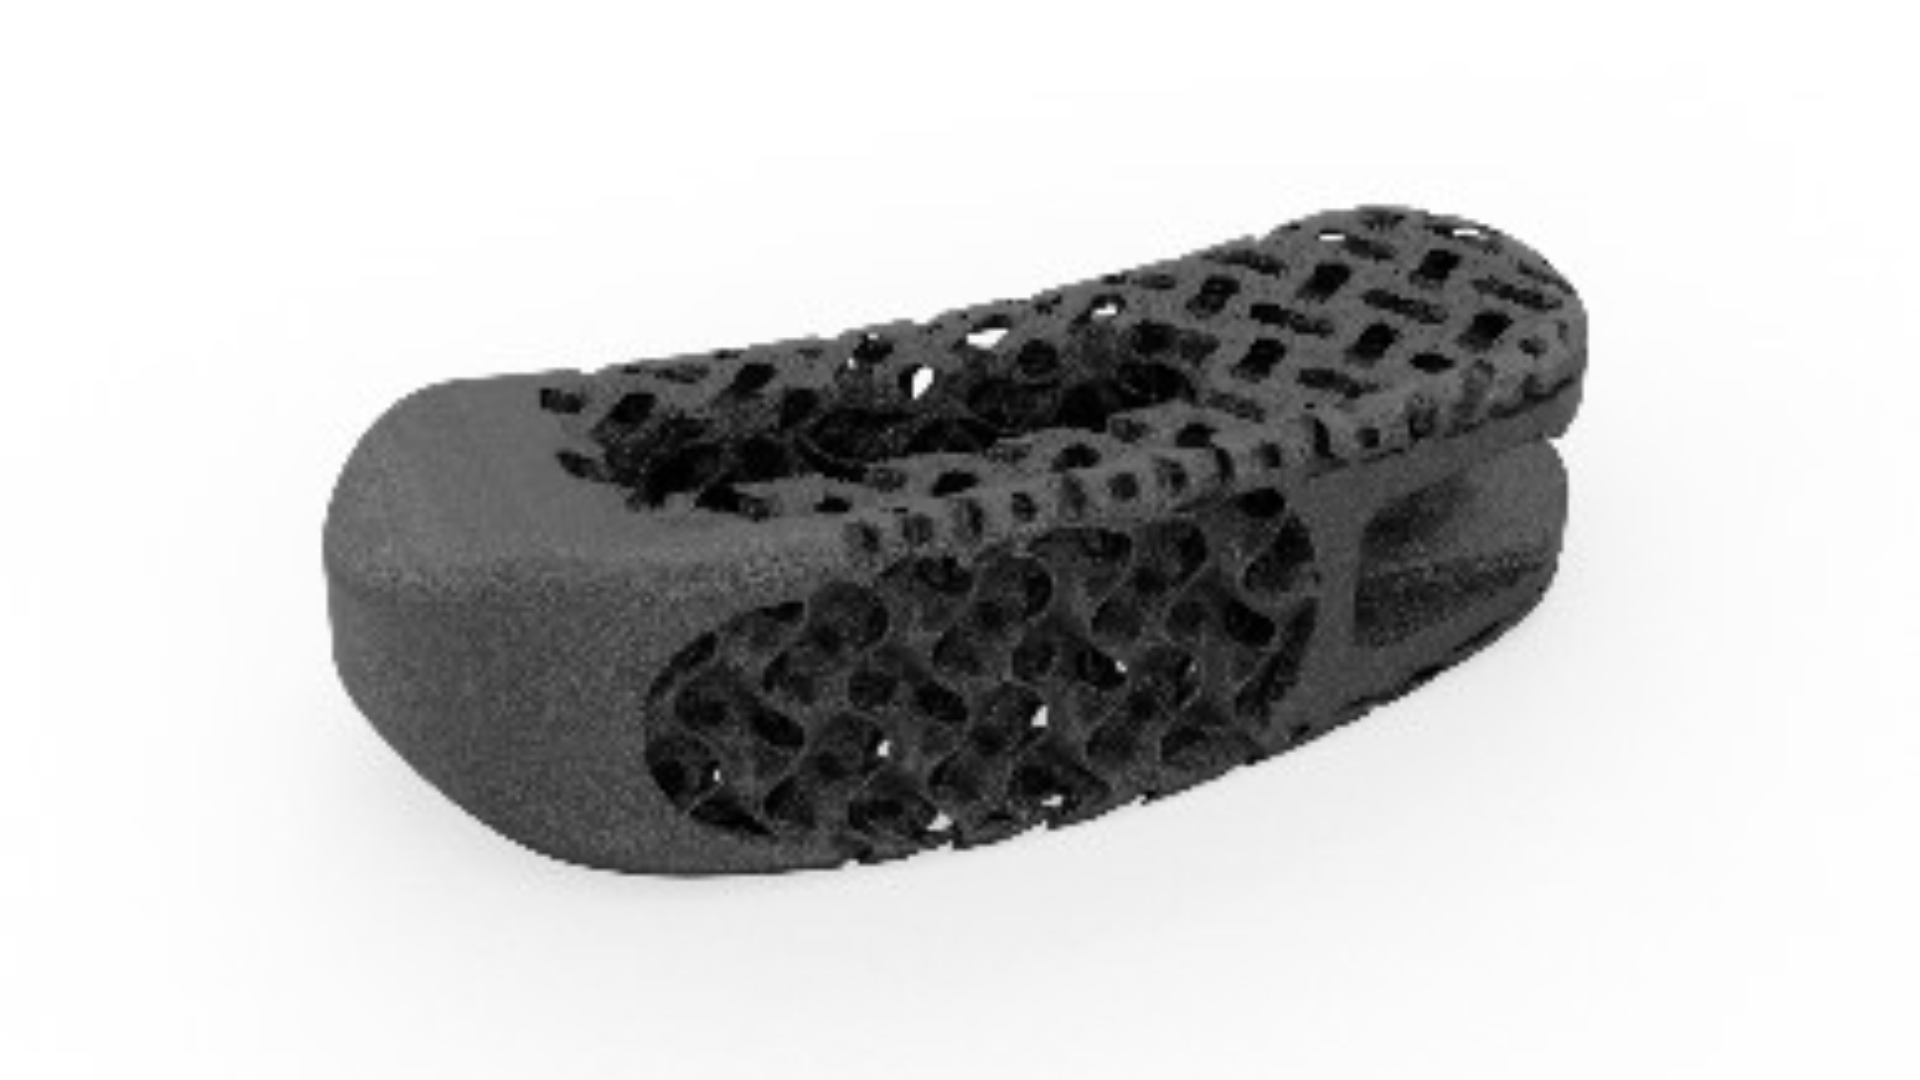 SeaSpine announced the full commercial launch of the WaveForm TA (TLIF Articulating) Interbody System produced with additive manufacturing.